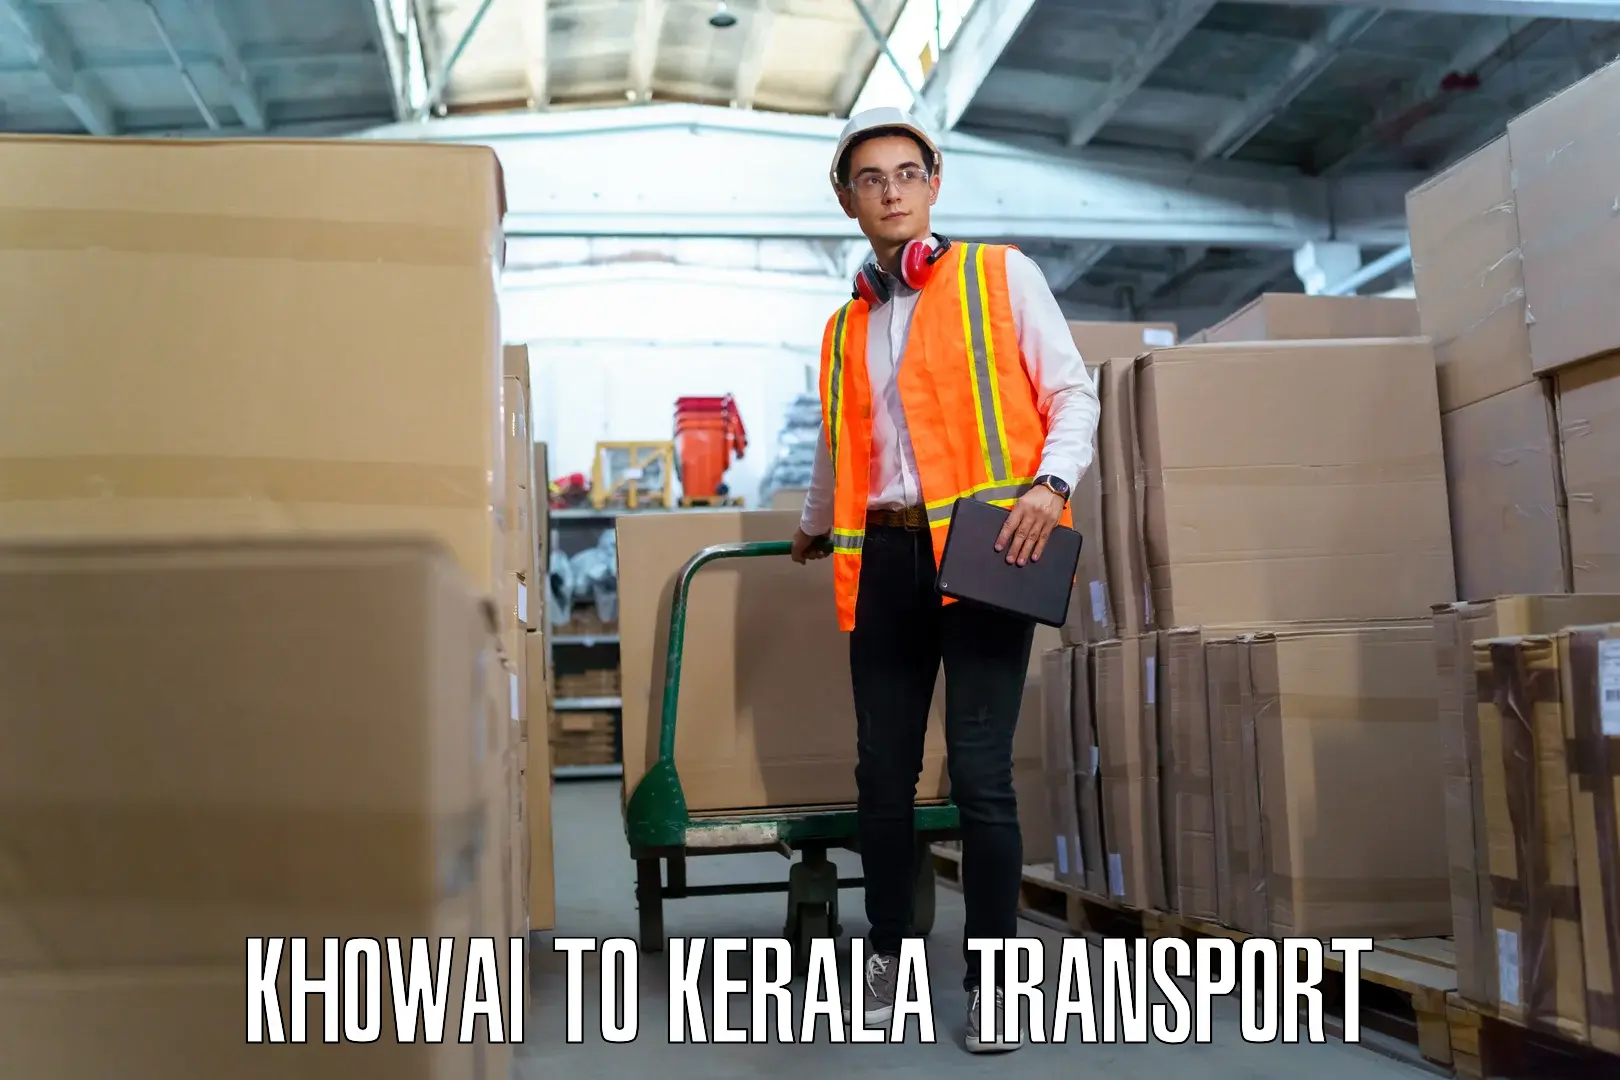 Transport bike from one state to another Khowai to Trivandrum